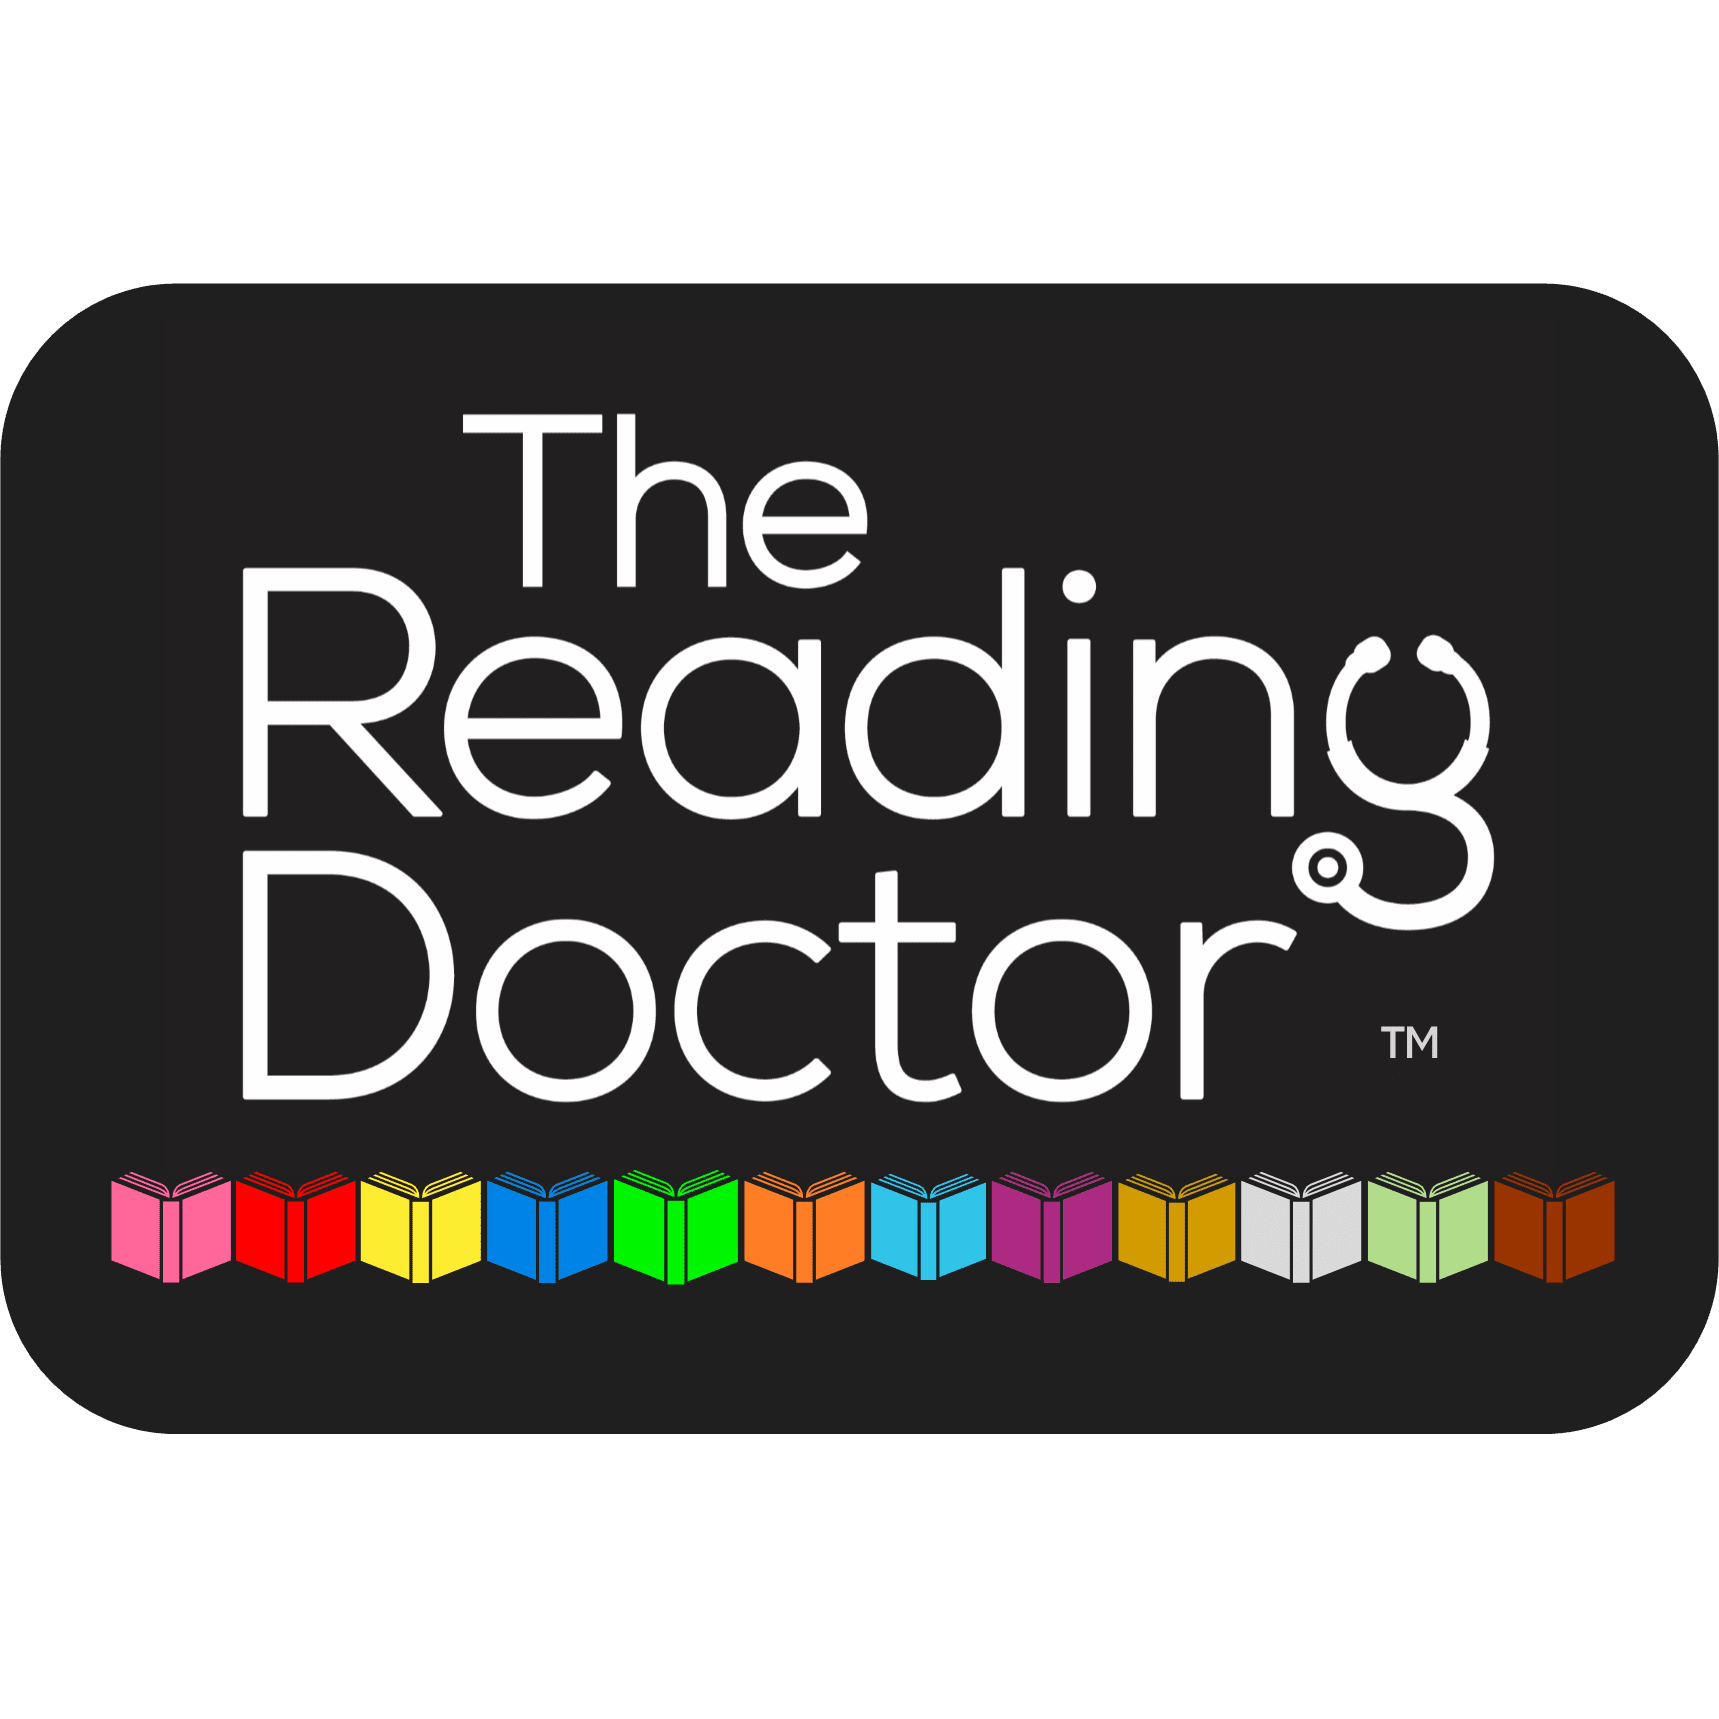 The Reading Doctor - Herne Bay, Kent CT6 5HX - 07796 676998 | ShowMeLocal.com